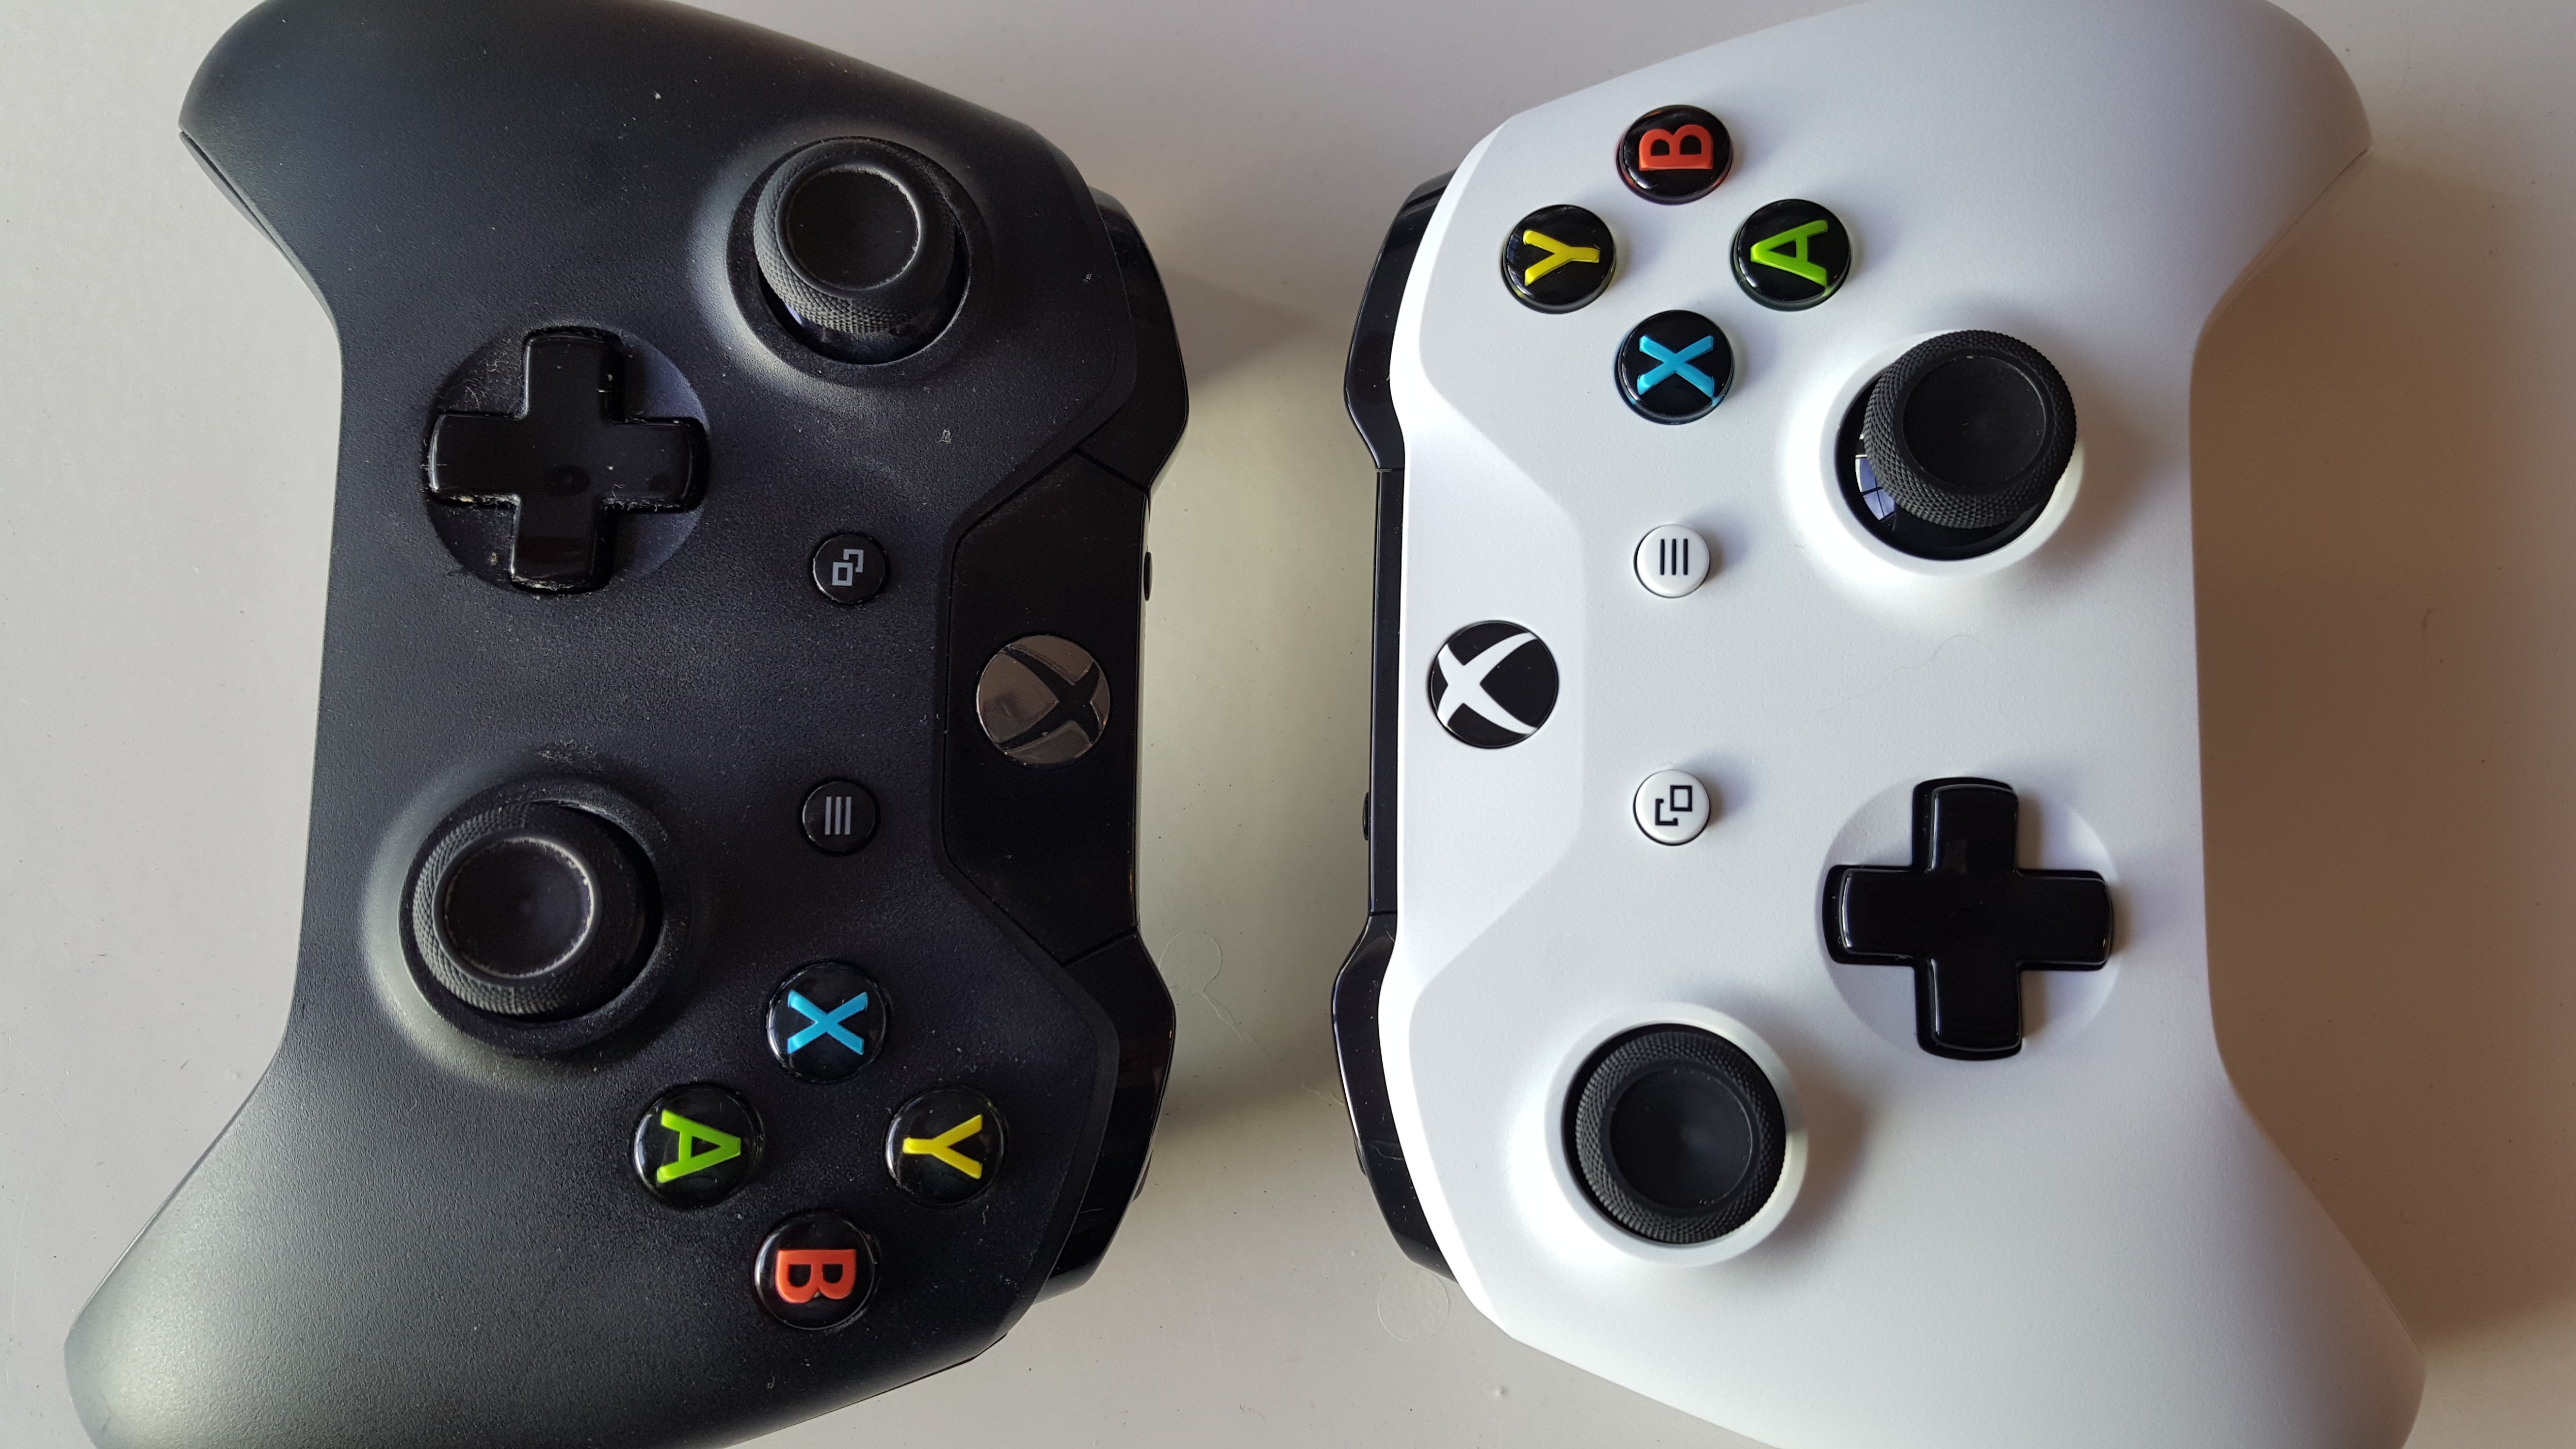 difference between xbox one and xbox one s